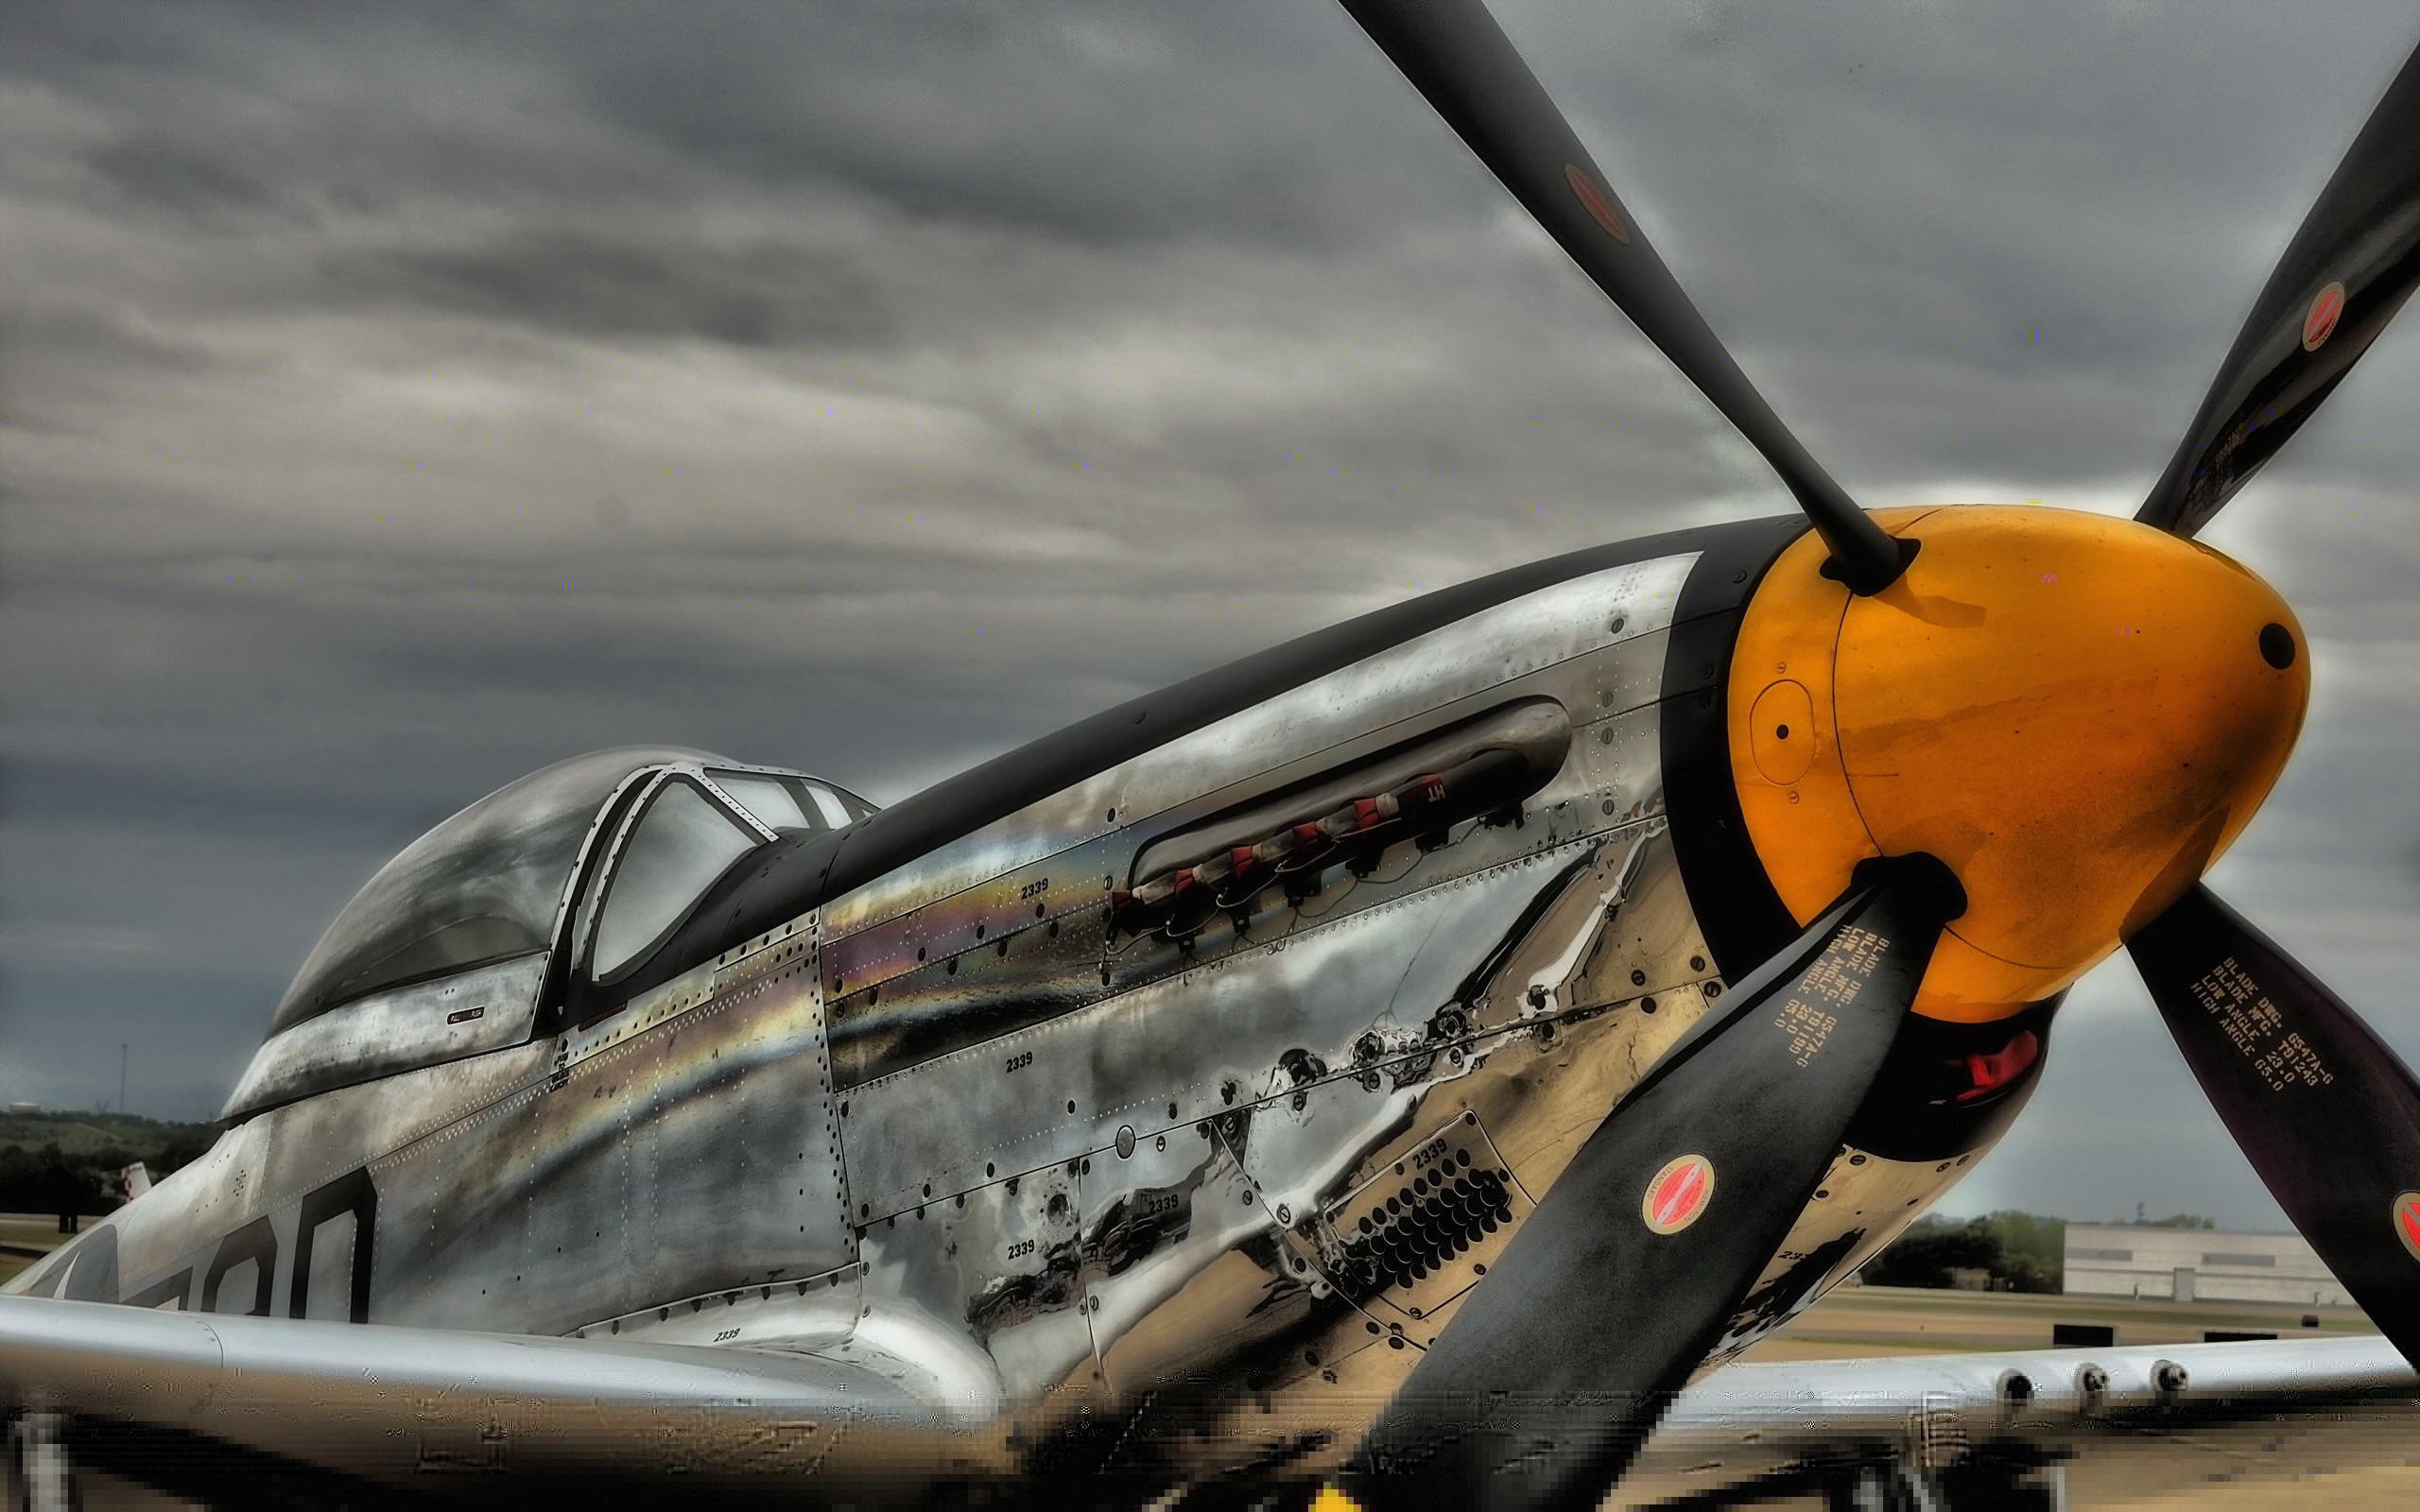 The propeller of the aircraft Wallpaper